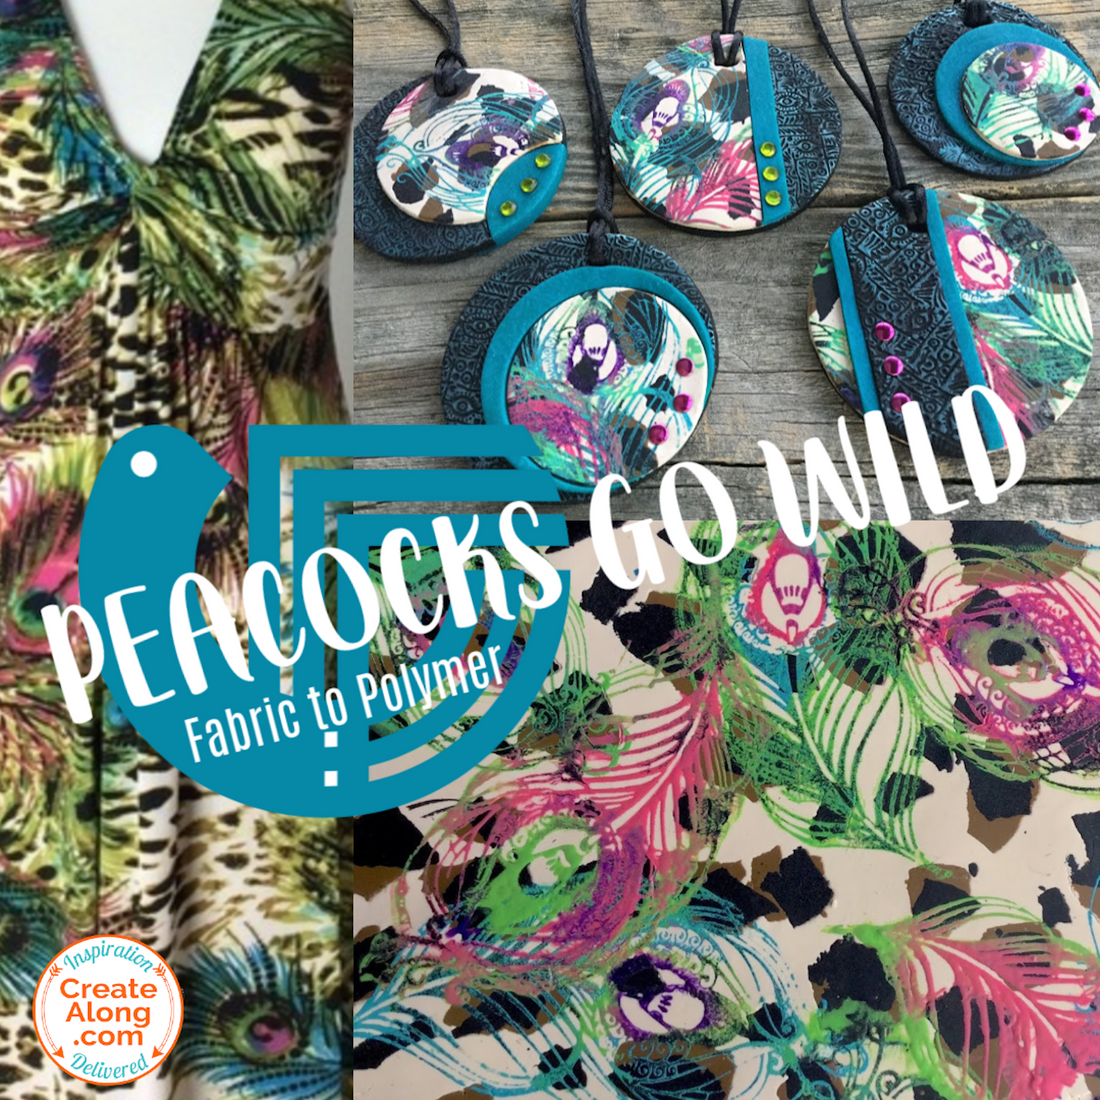 Peacocks Go Wild!  How to make a colorful multi-patterned polymer clay veneer